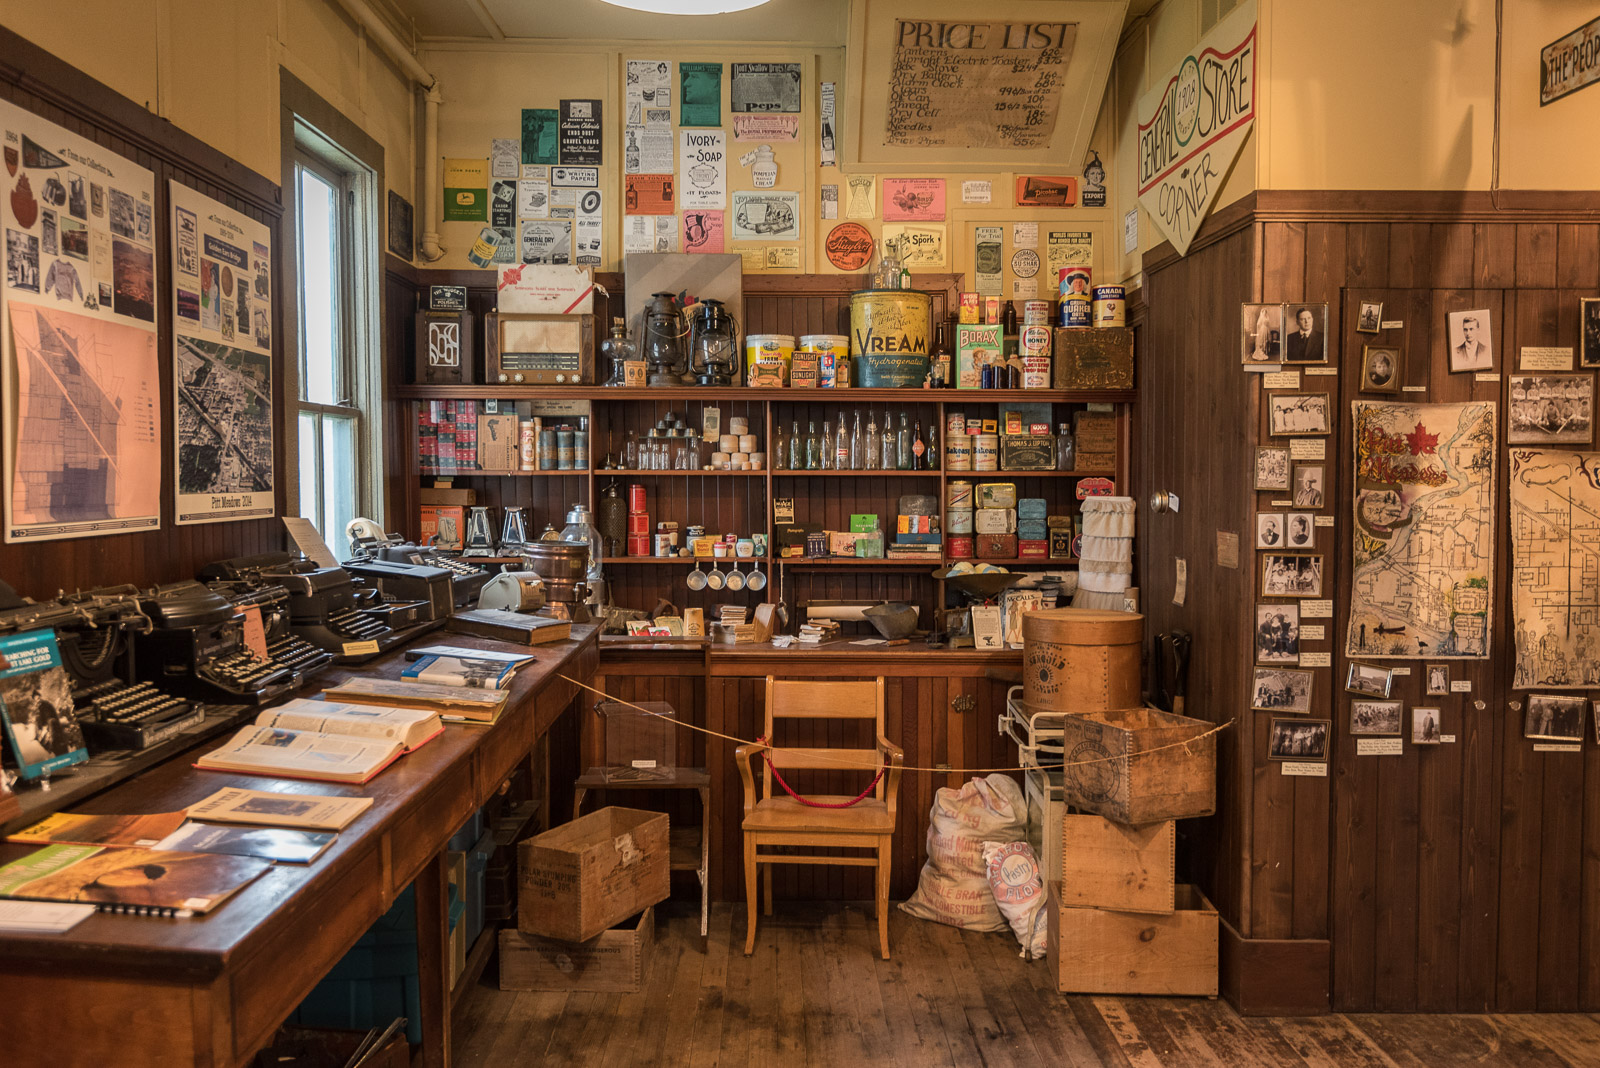 Interior of the Old General Store